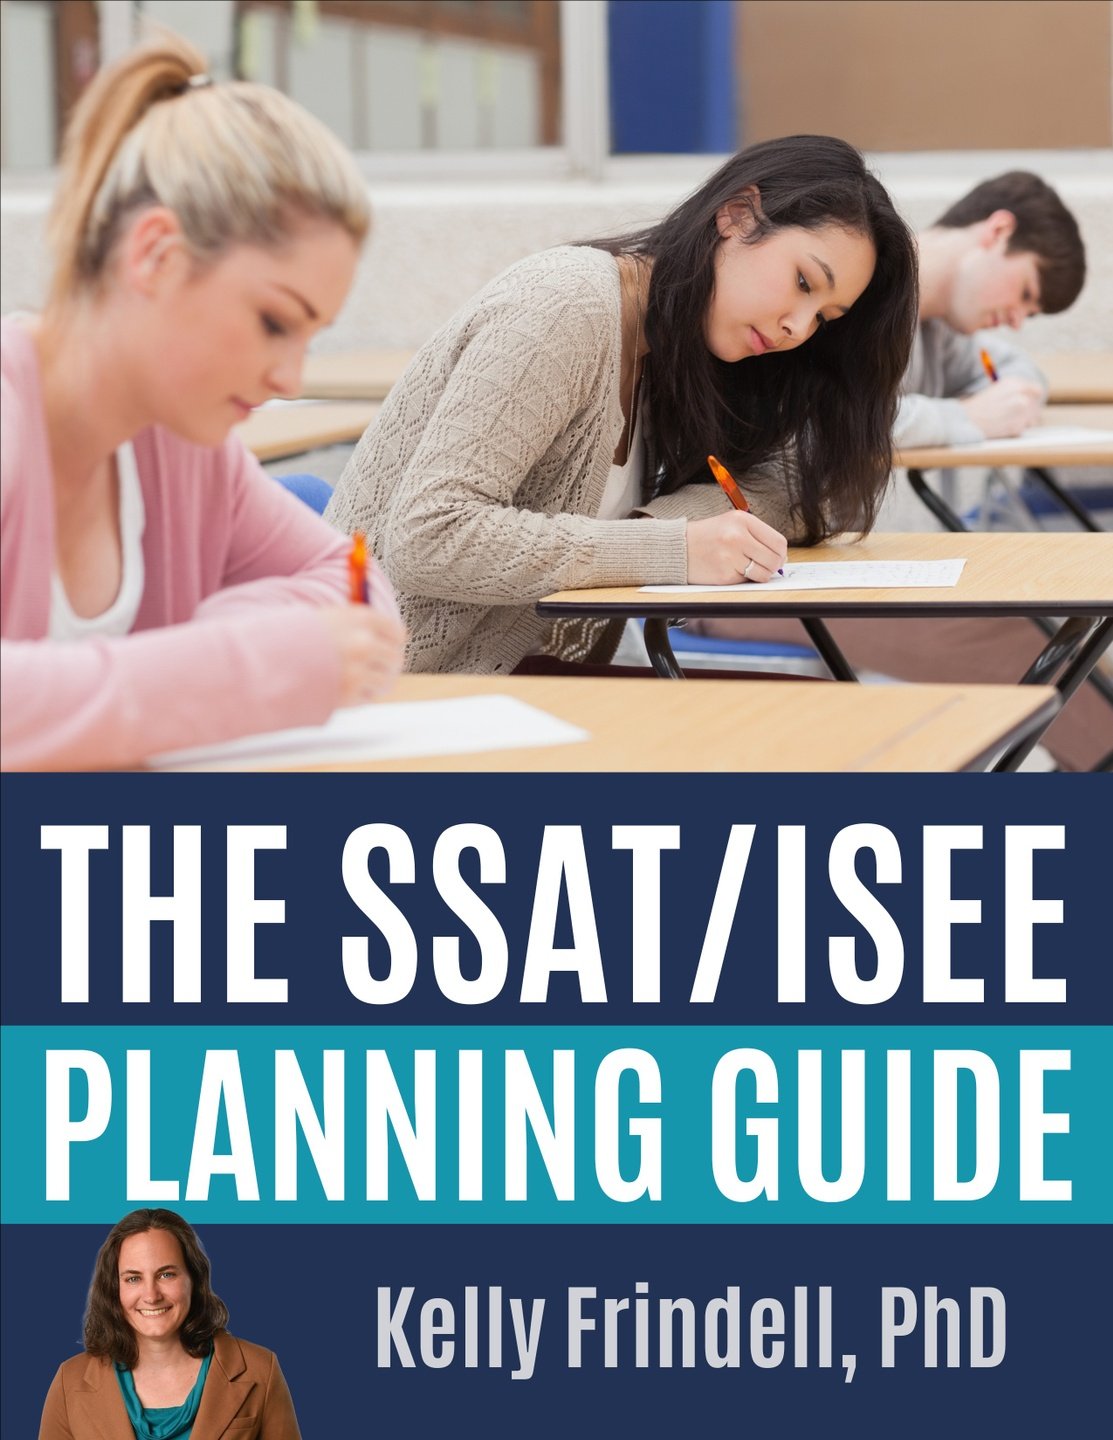 Get The Best Online SSAT & SAT Preparation Classes With This Expert Test Tutor